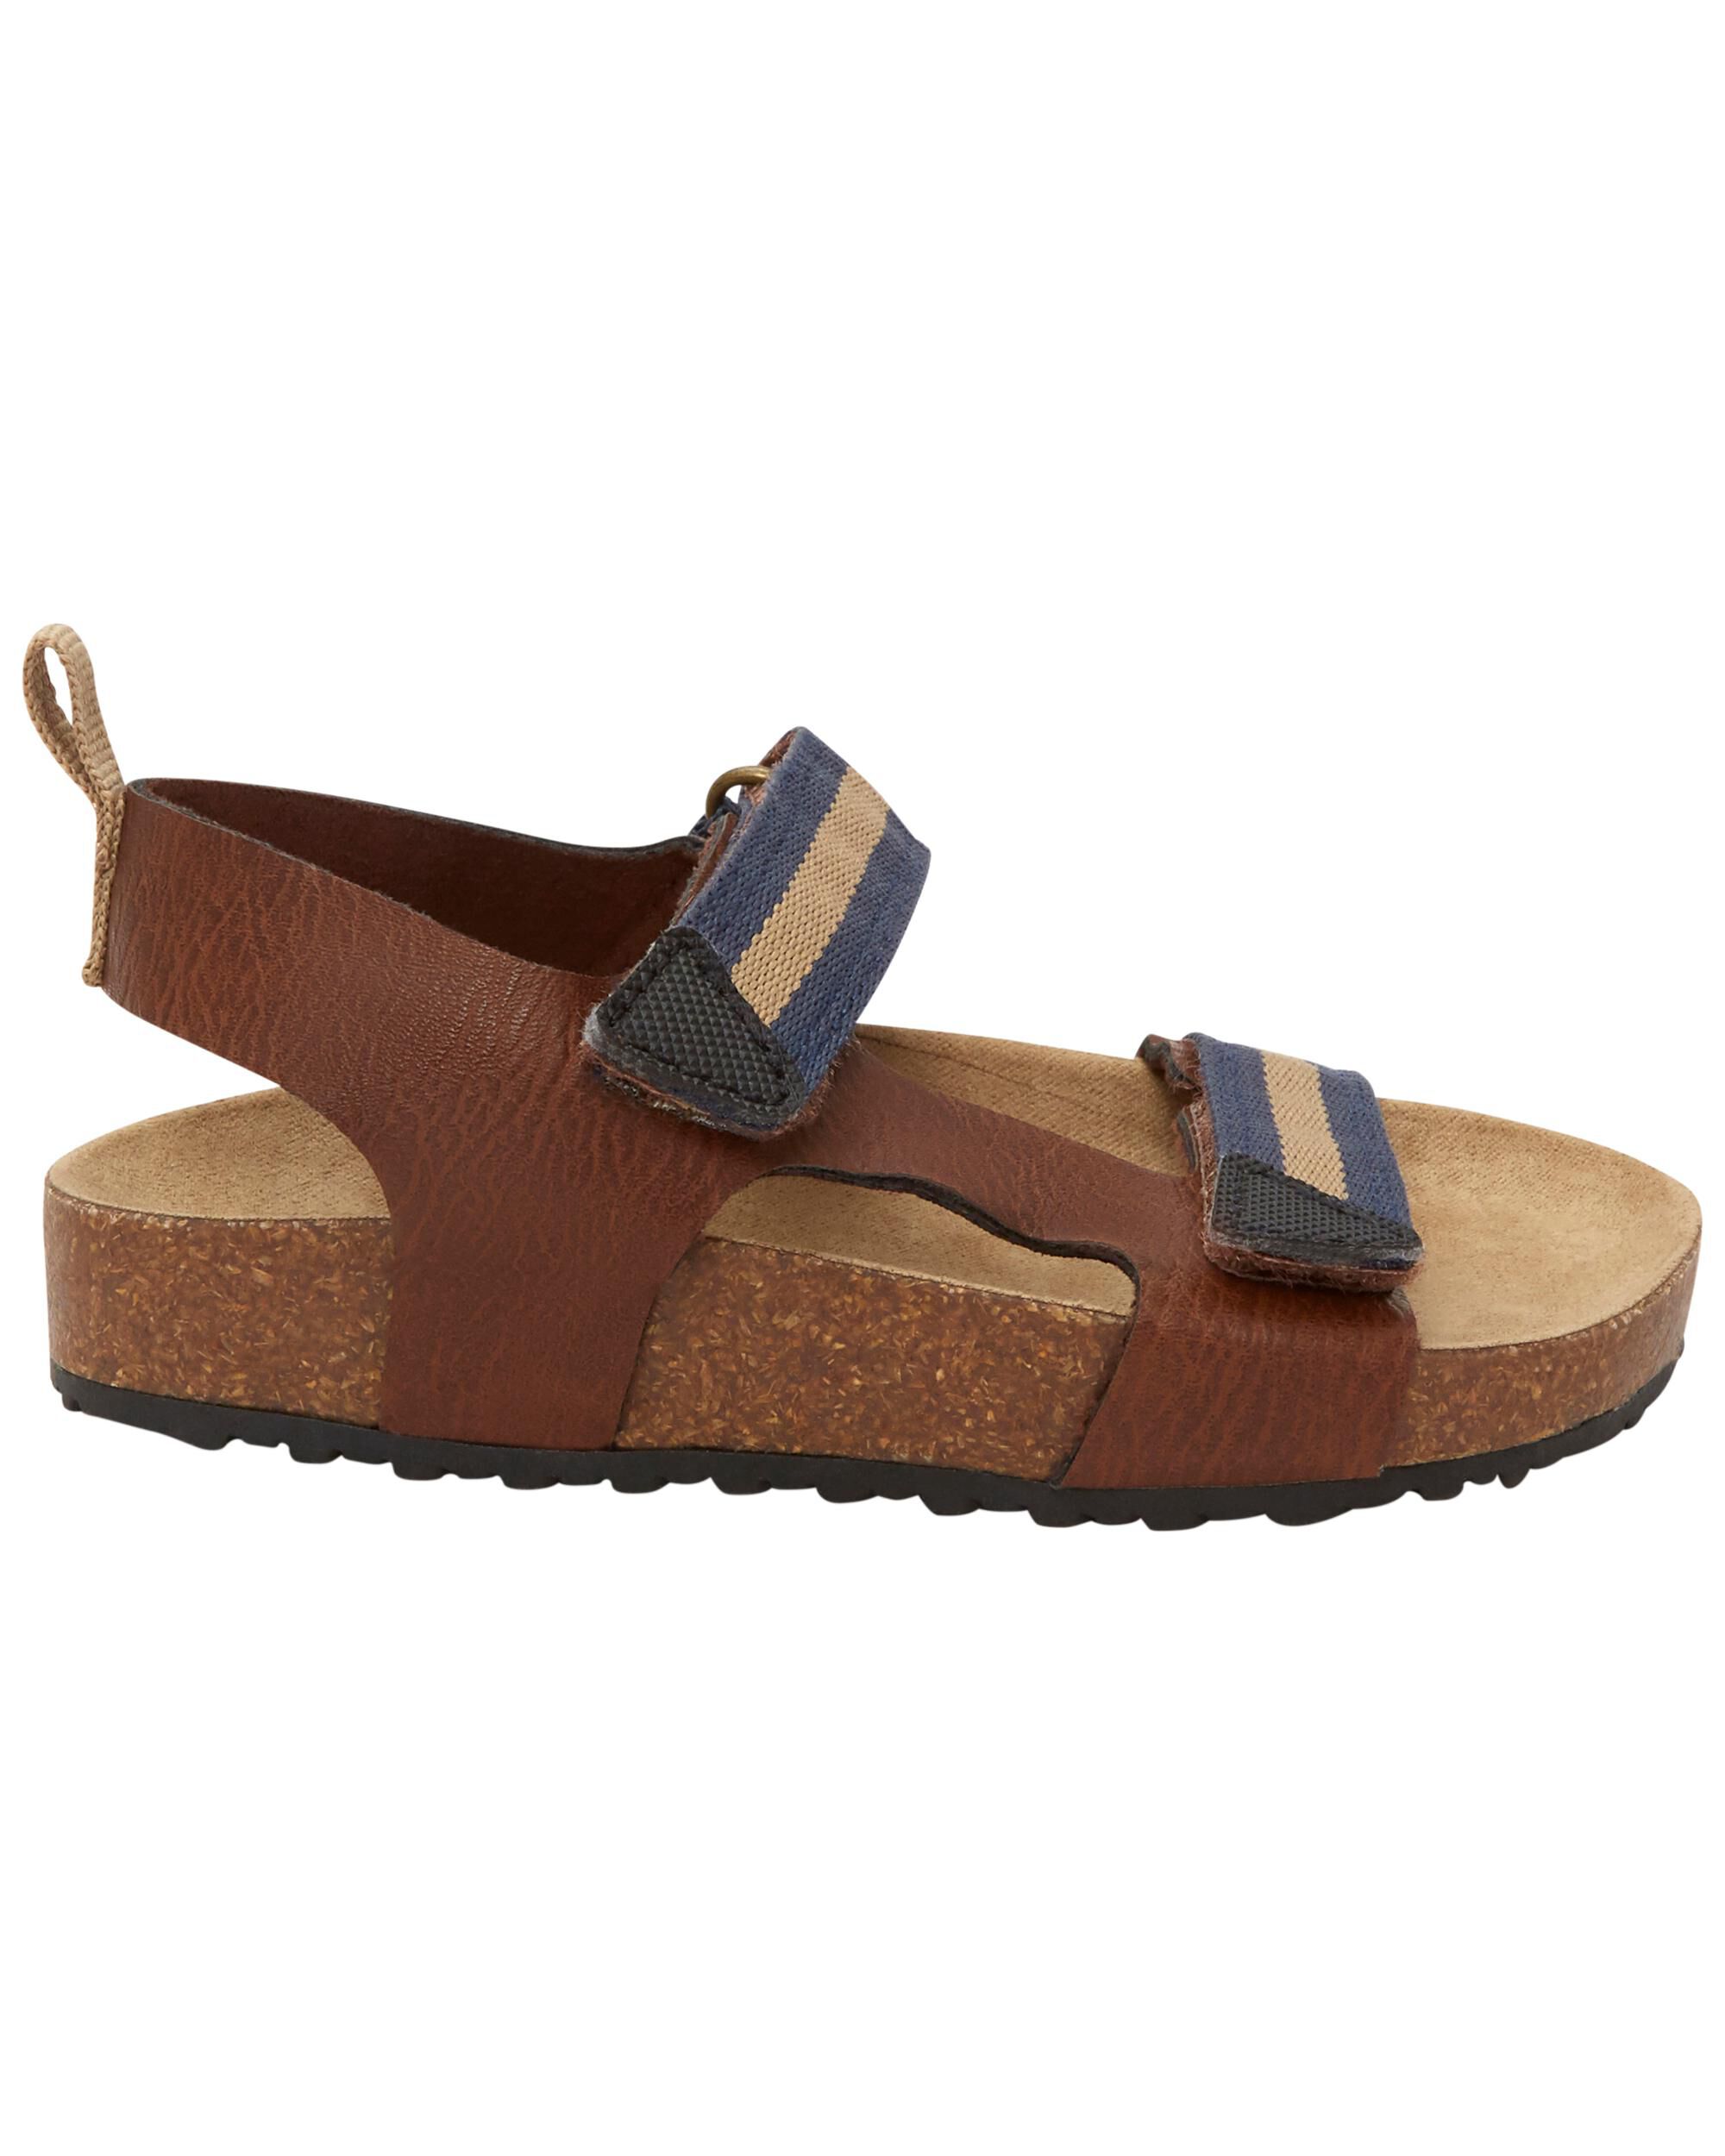 Carter's Toddler Boys Casual Sandals Summer Brown New 